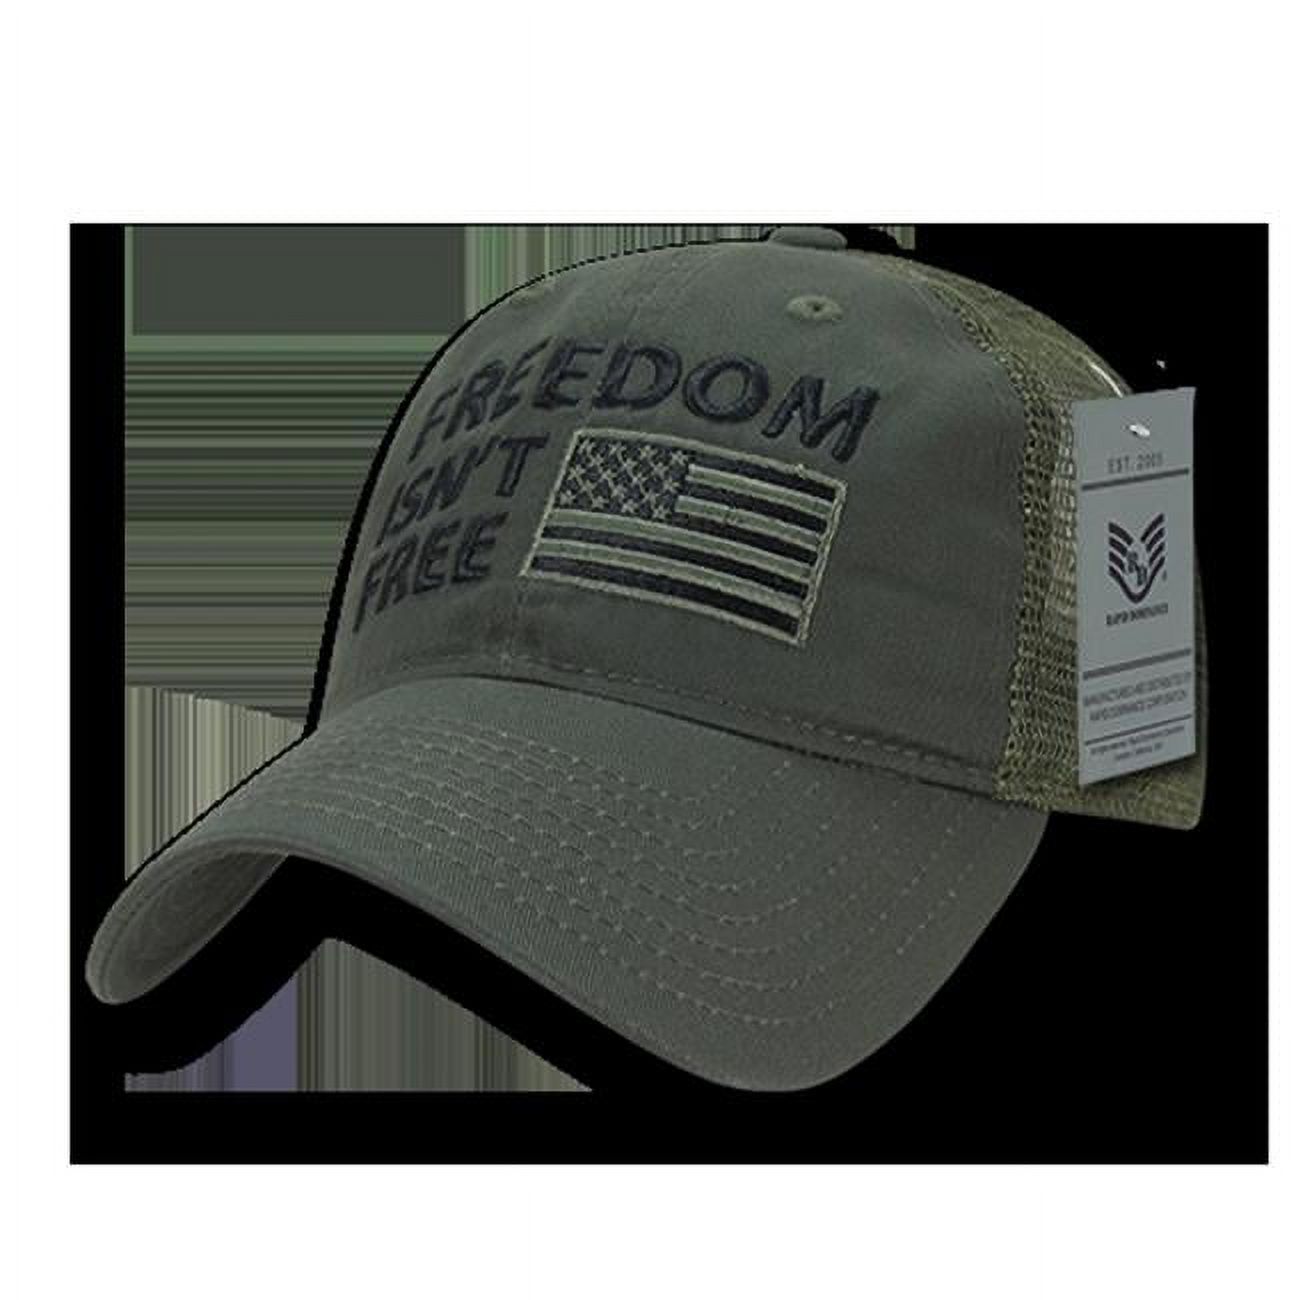 Rapid Dominance A05-FIF-OLV Freedom Relaxed Trucker USA Cap, Olive - image 1 of 3